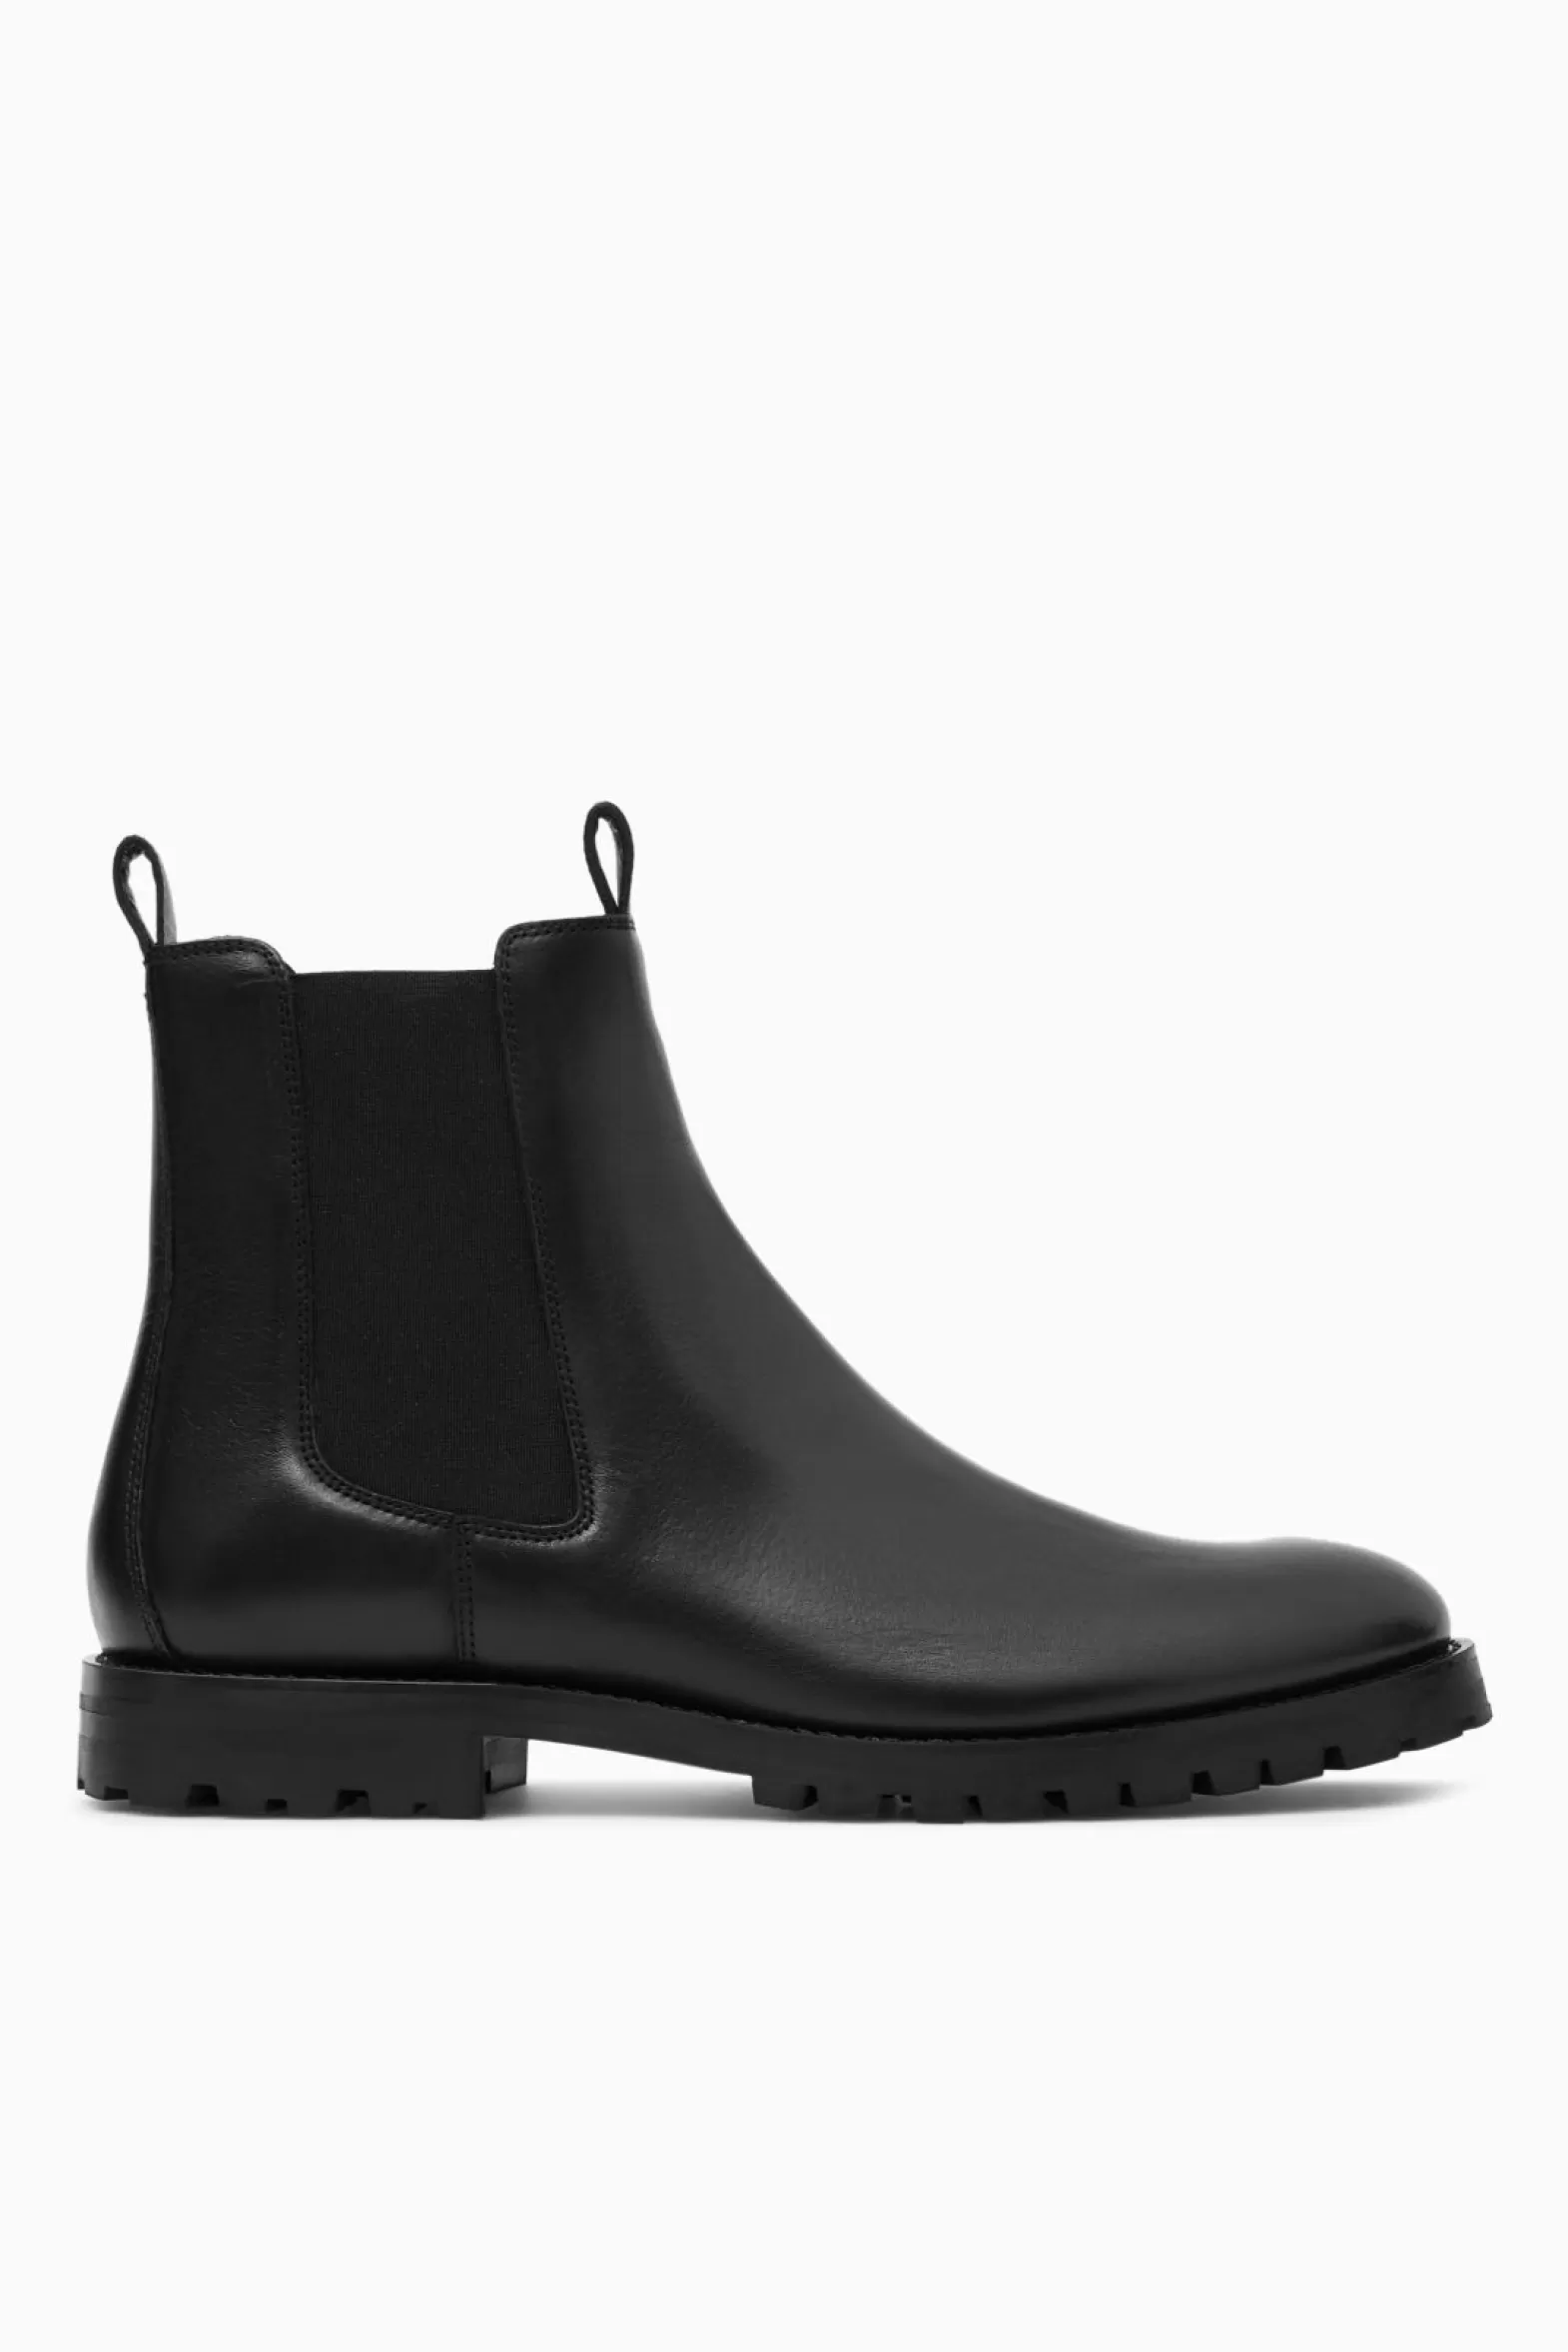 COS LEATHER CHELSEA BOOTS